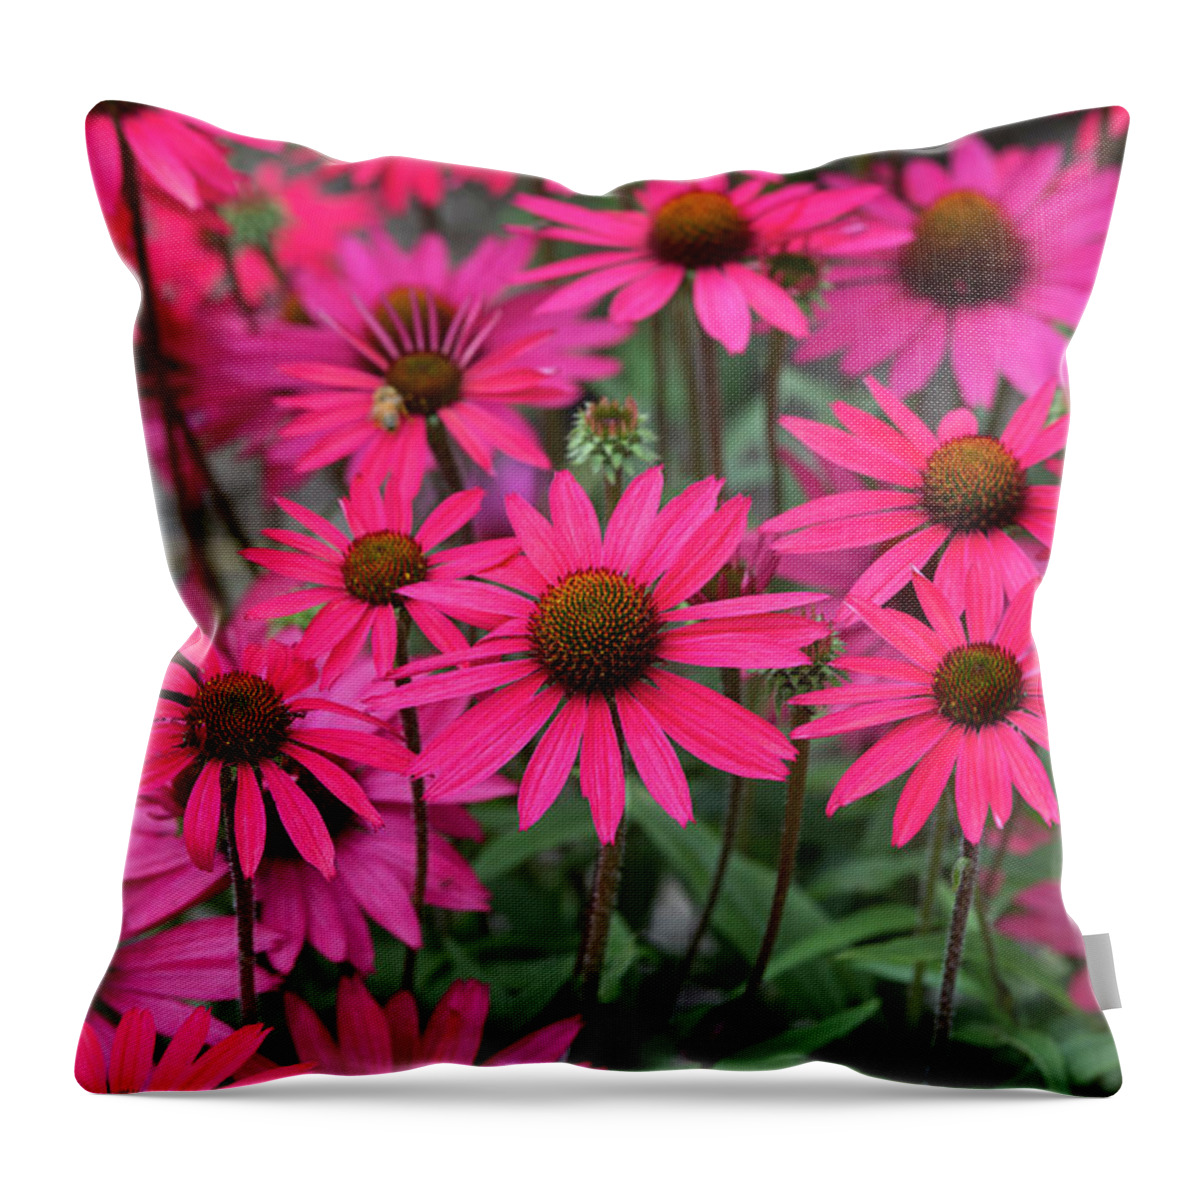 Echinacea Cheyenne Spirit Throw Pillow featuring the photograph Echinacea Glowing Dream Flowers by Tim Gainey